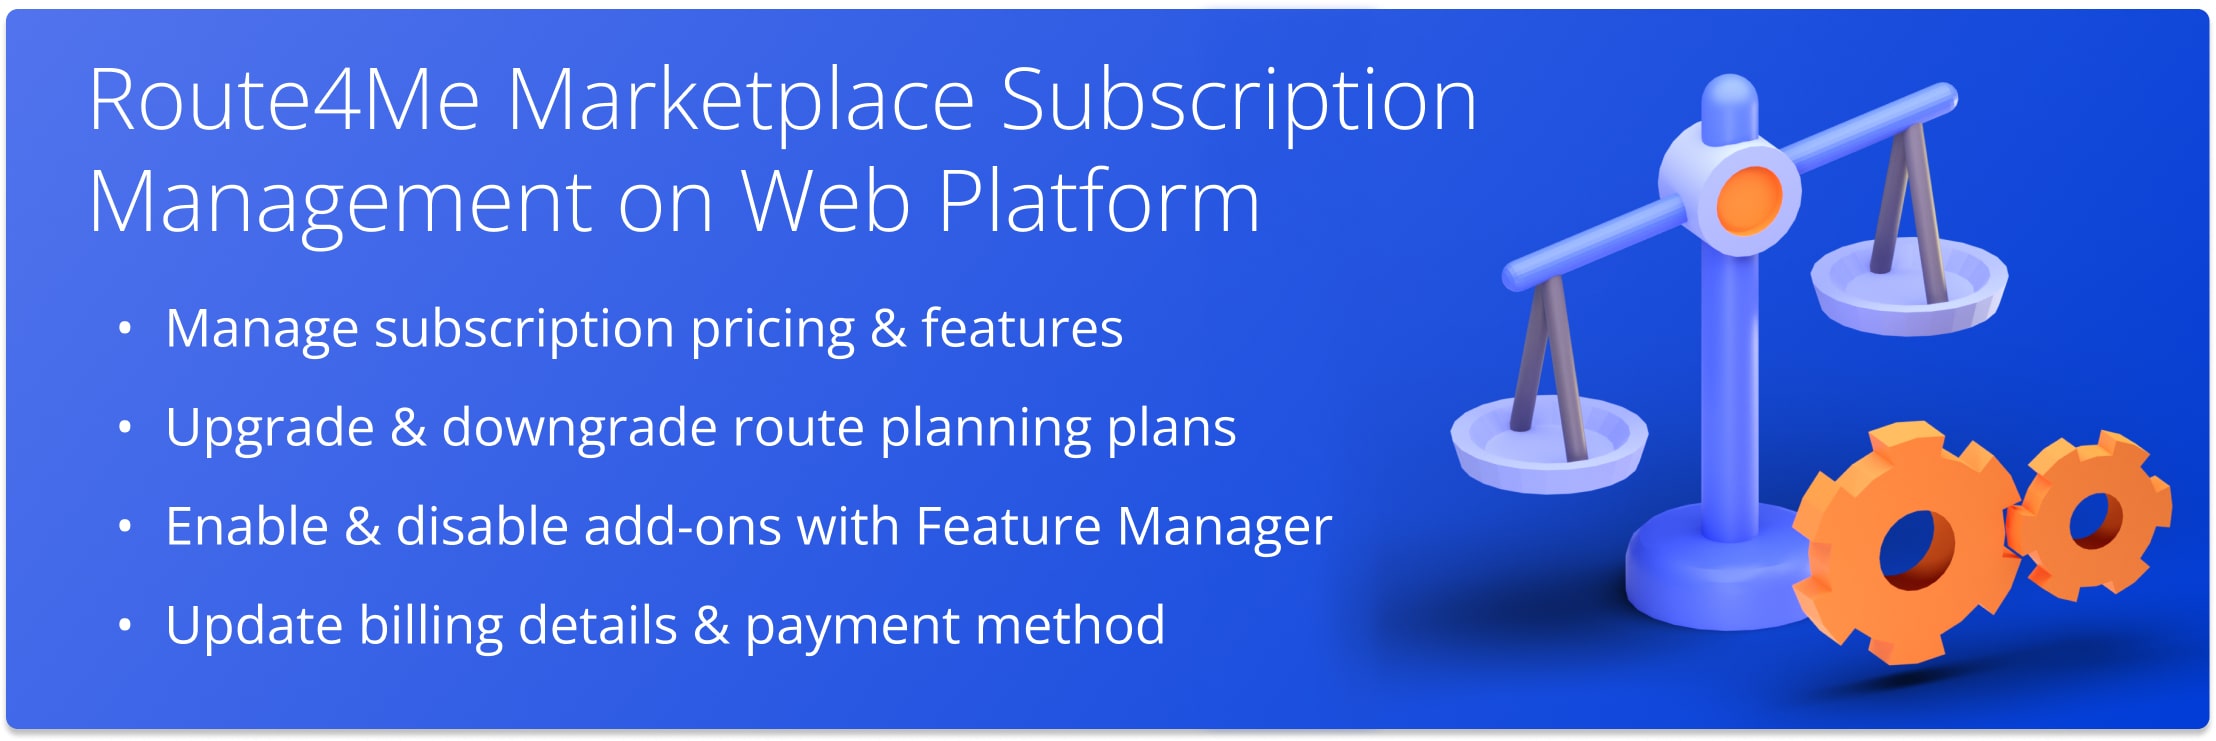 Route4Me Marketplace Subscription: Pricing, upgrade and downgrade plan, enable and disable add-ons with Feature Manager, billing details, and payment method.